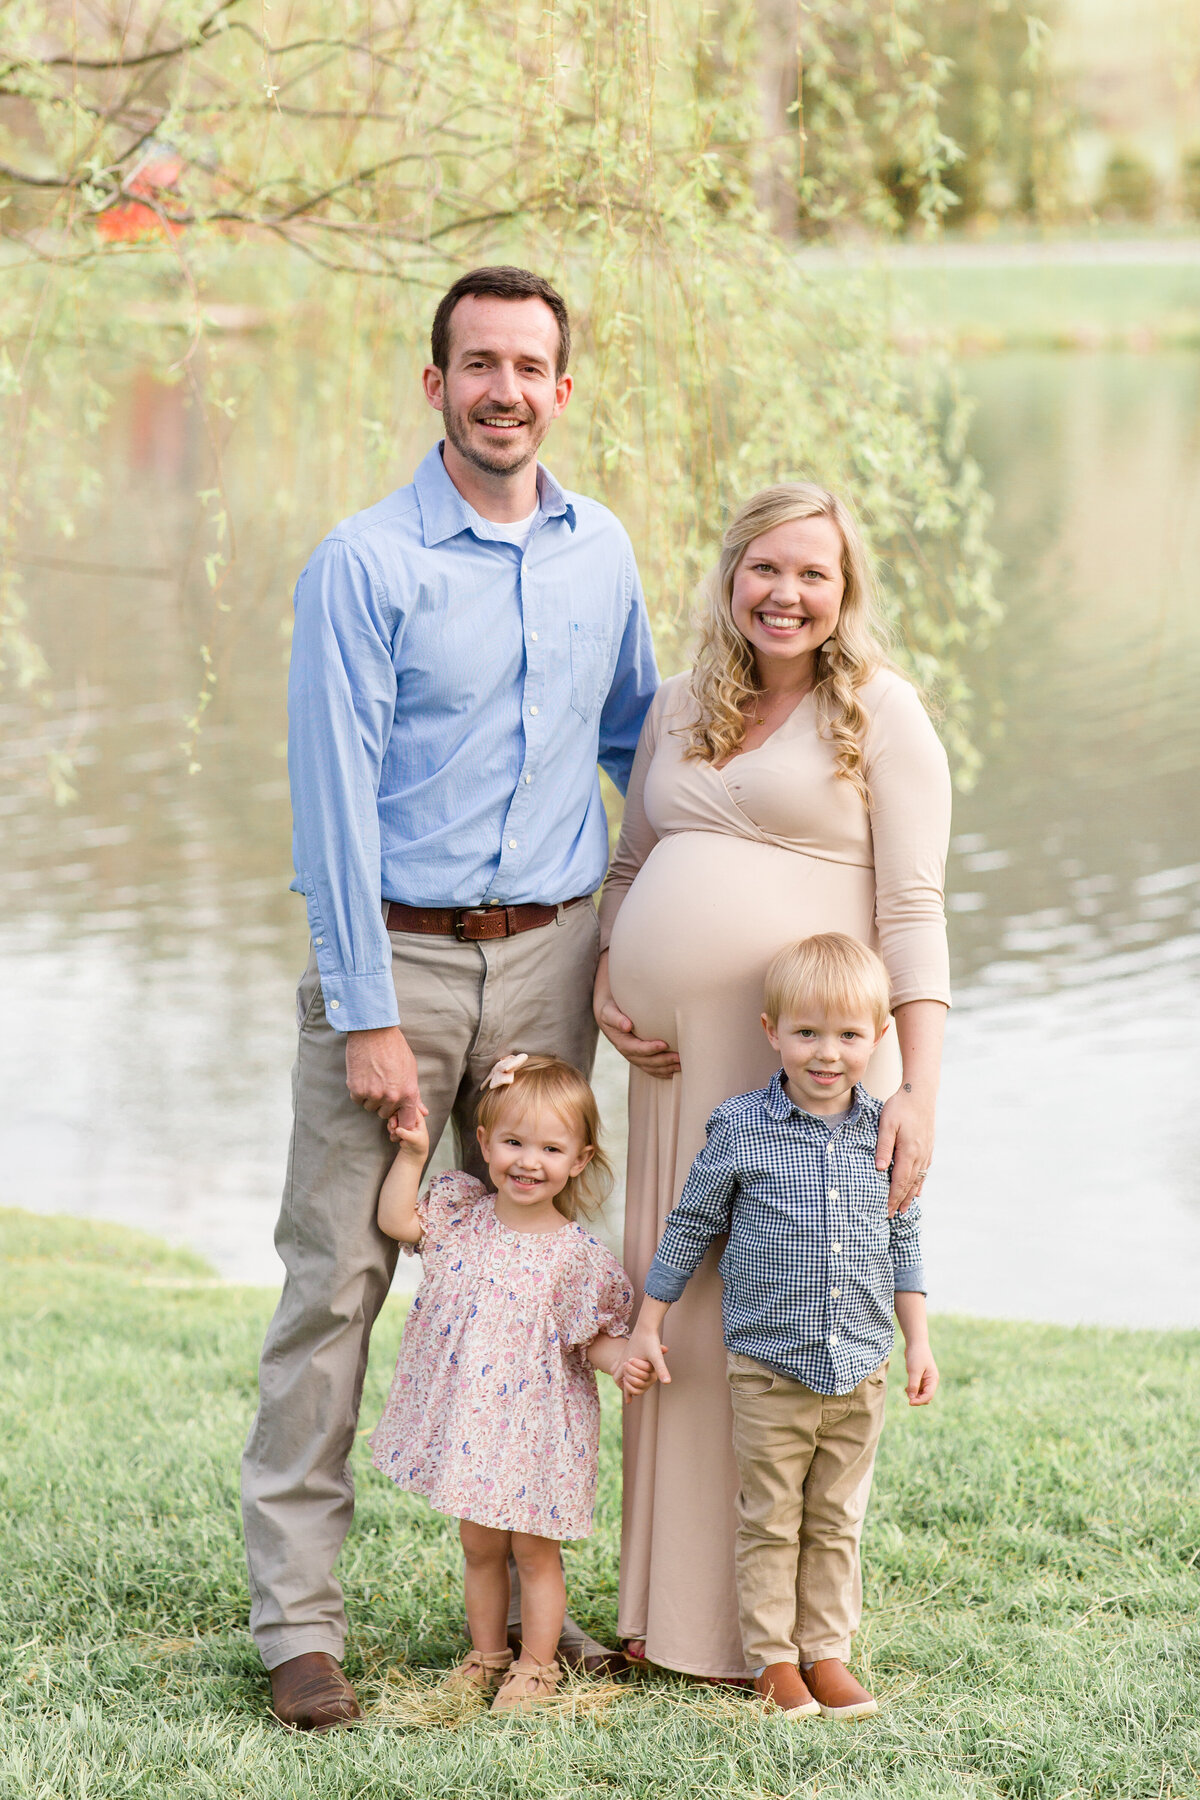 Rebecca Rice Photography Education Family Portrait Financial Freedom Thriving Photography Business Educational Resources Grow Your Photo Business Nashville TN Tennessee Free Resources Online Courses Podcast5